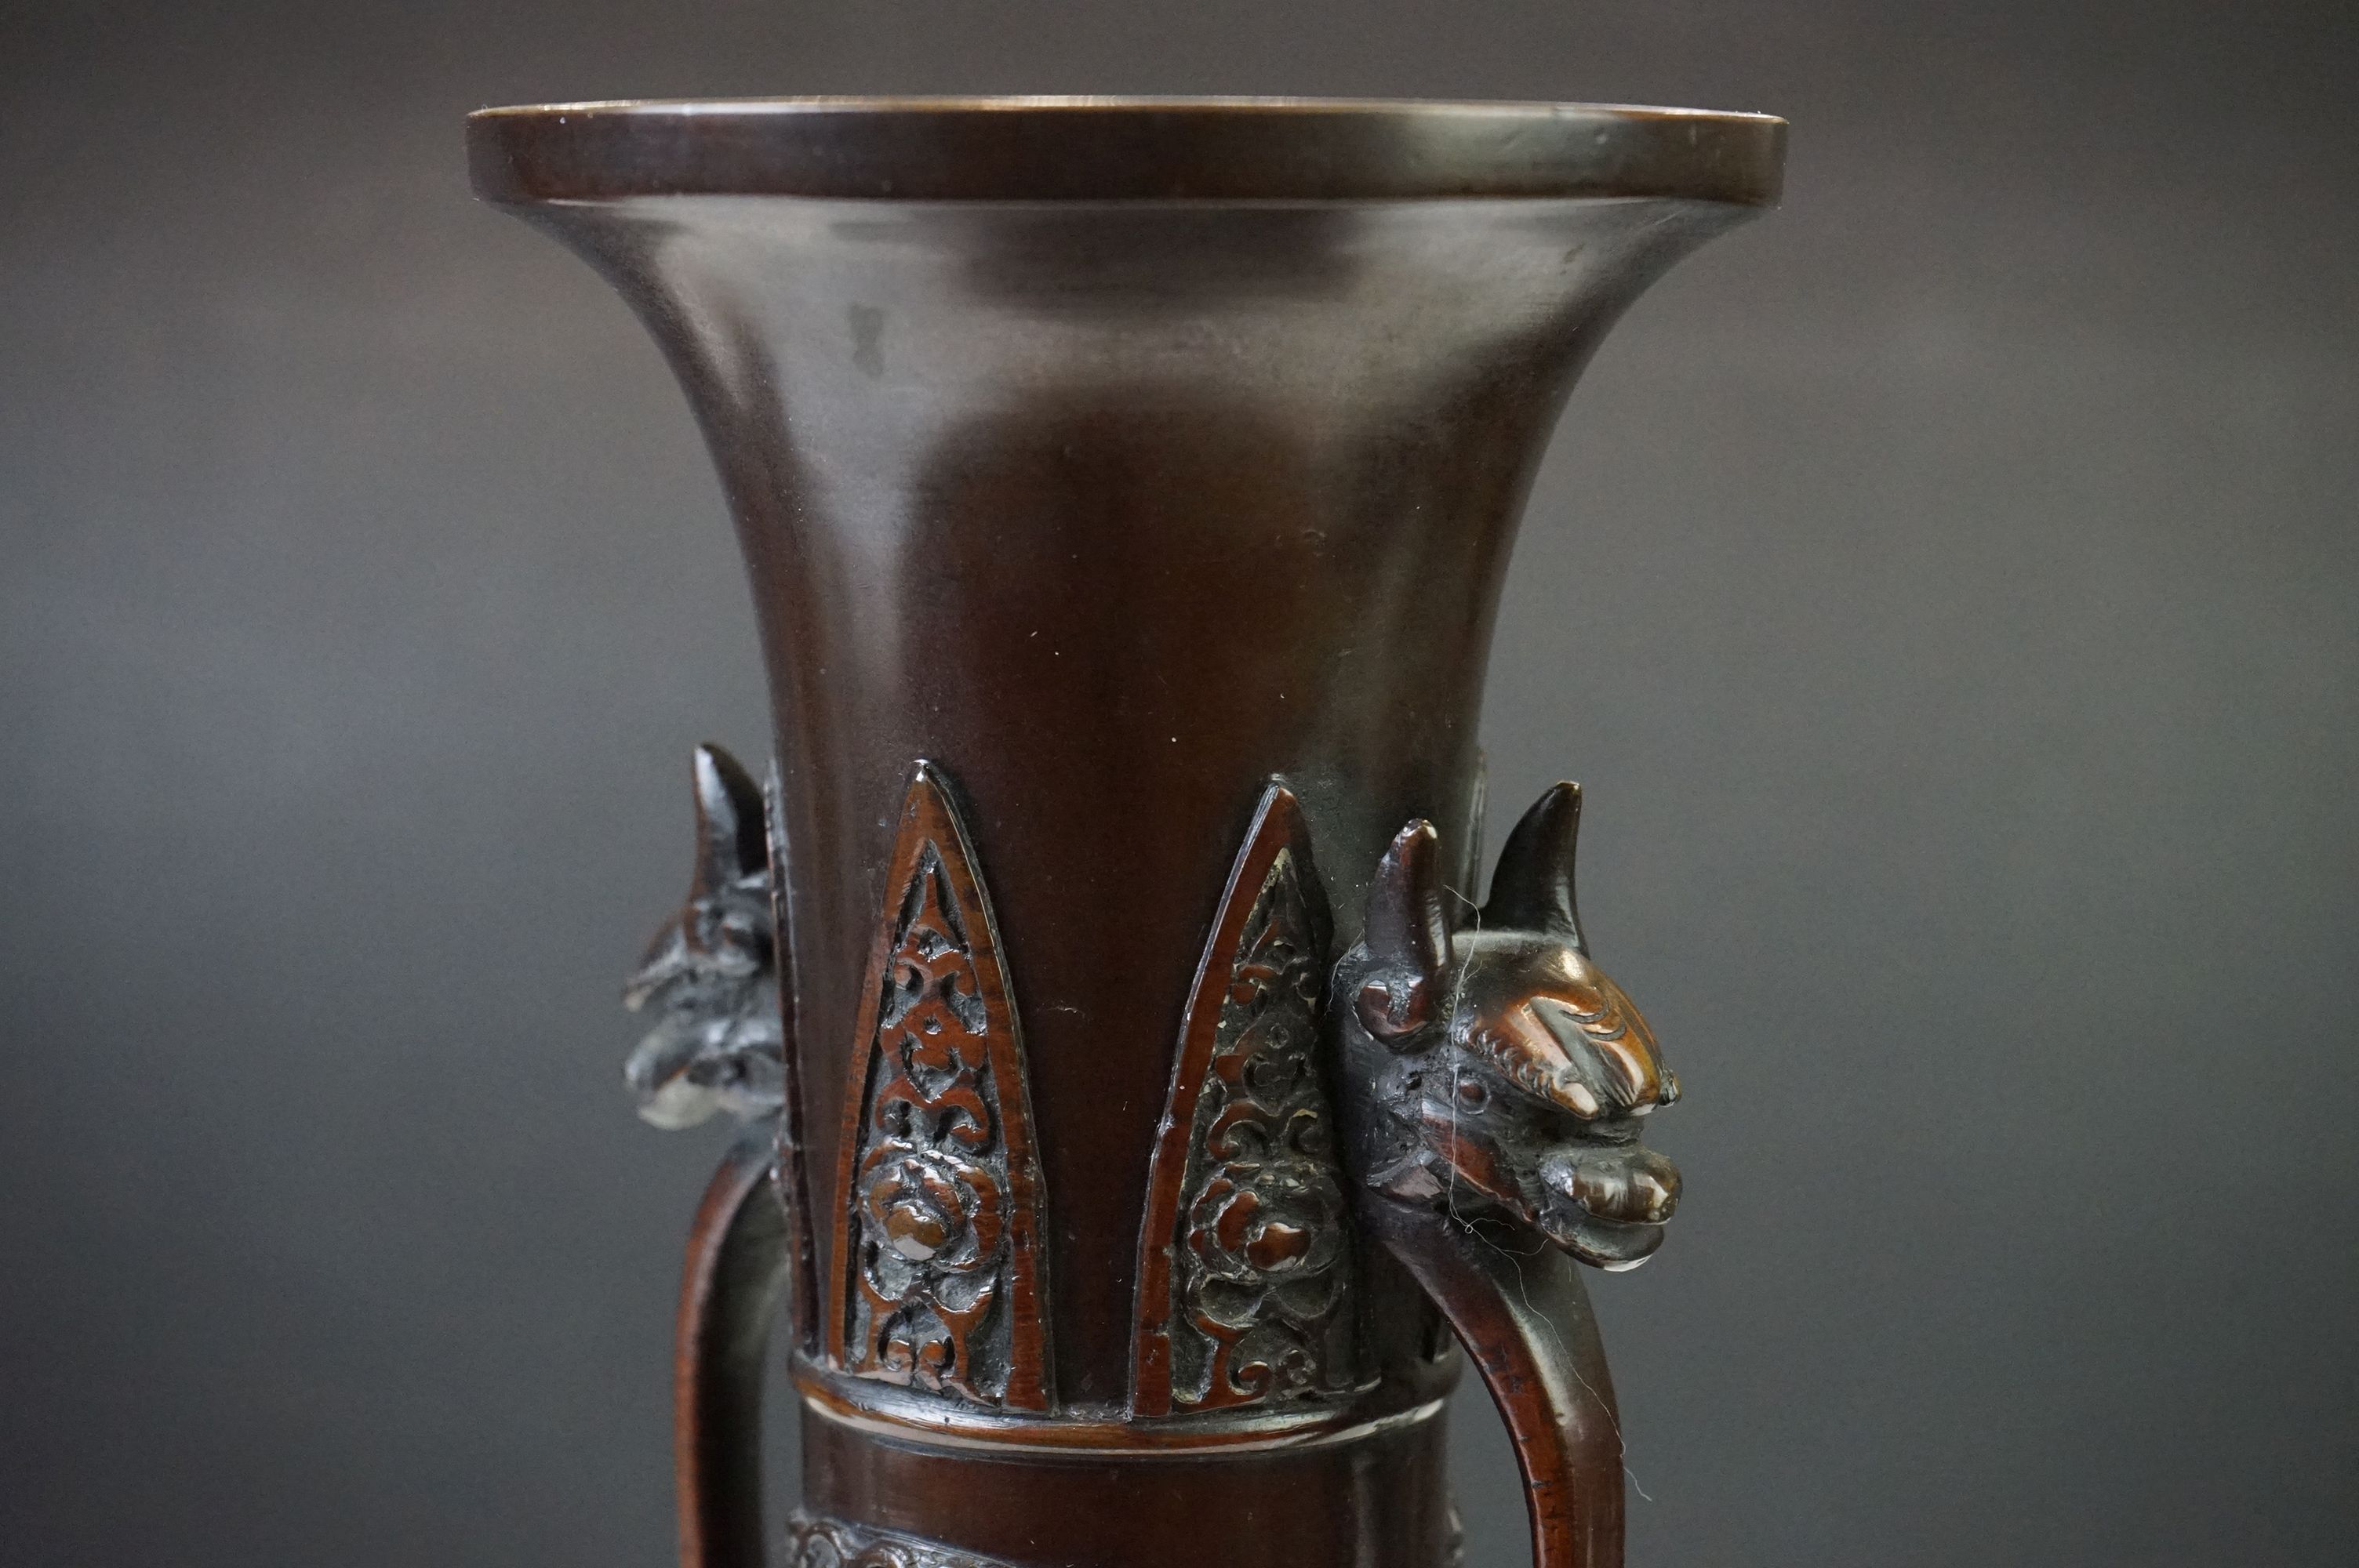 Near pair of Japanese bronze twin-handled bottle vases, with relief ornithological decoration and - Image 12 of 14